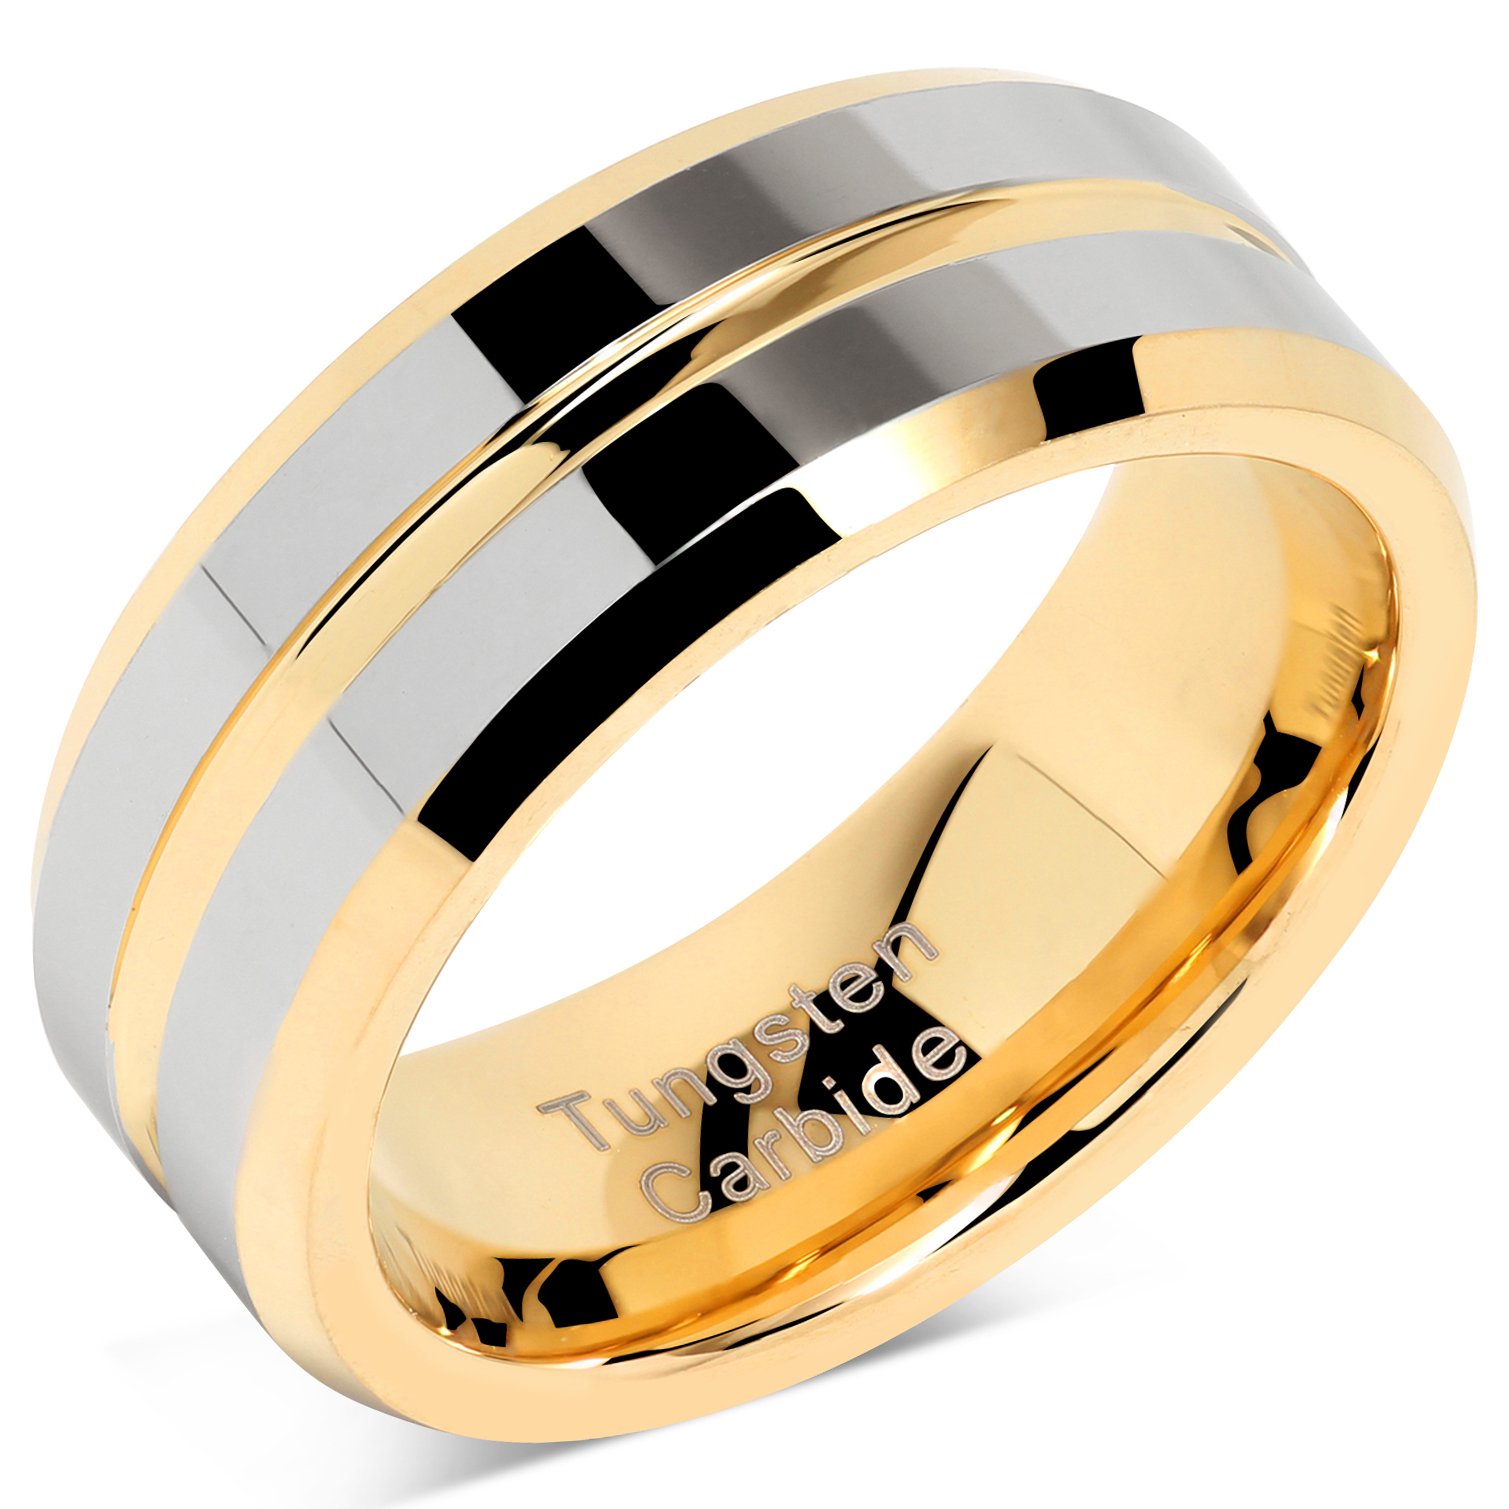 ATOP Tungsten Men Wedding Bands Gold Silver Two Tone Grooved.